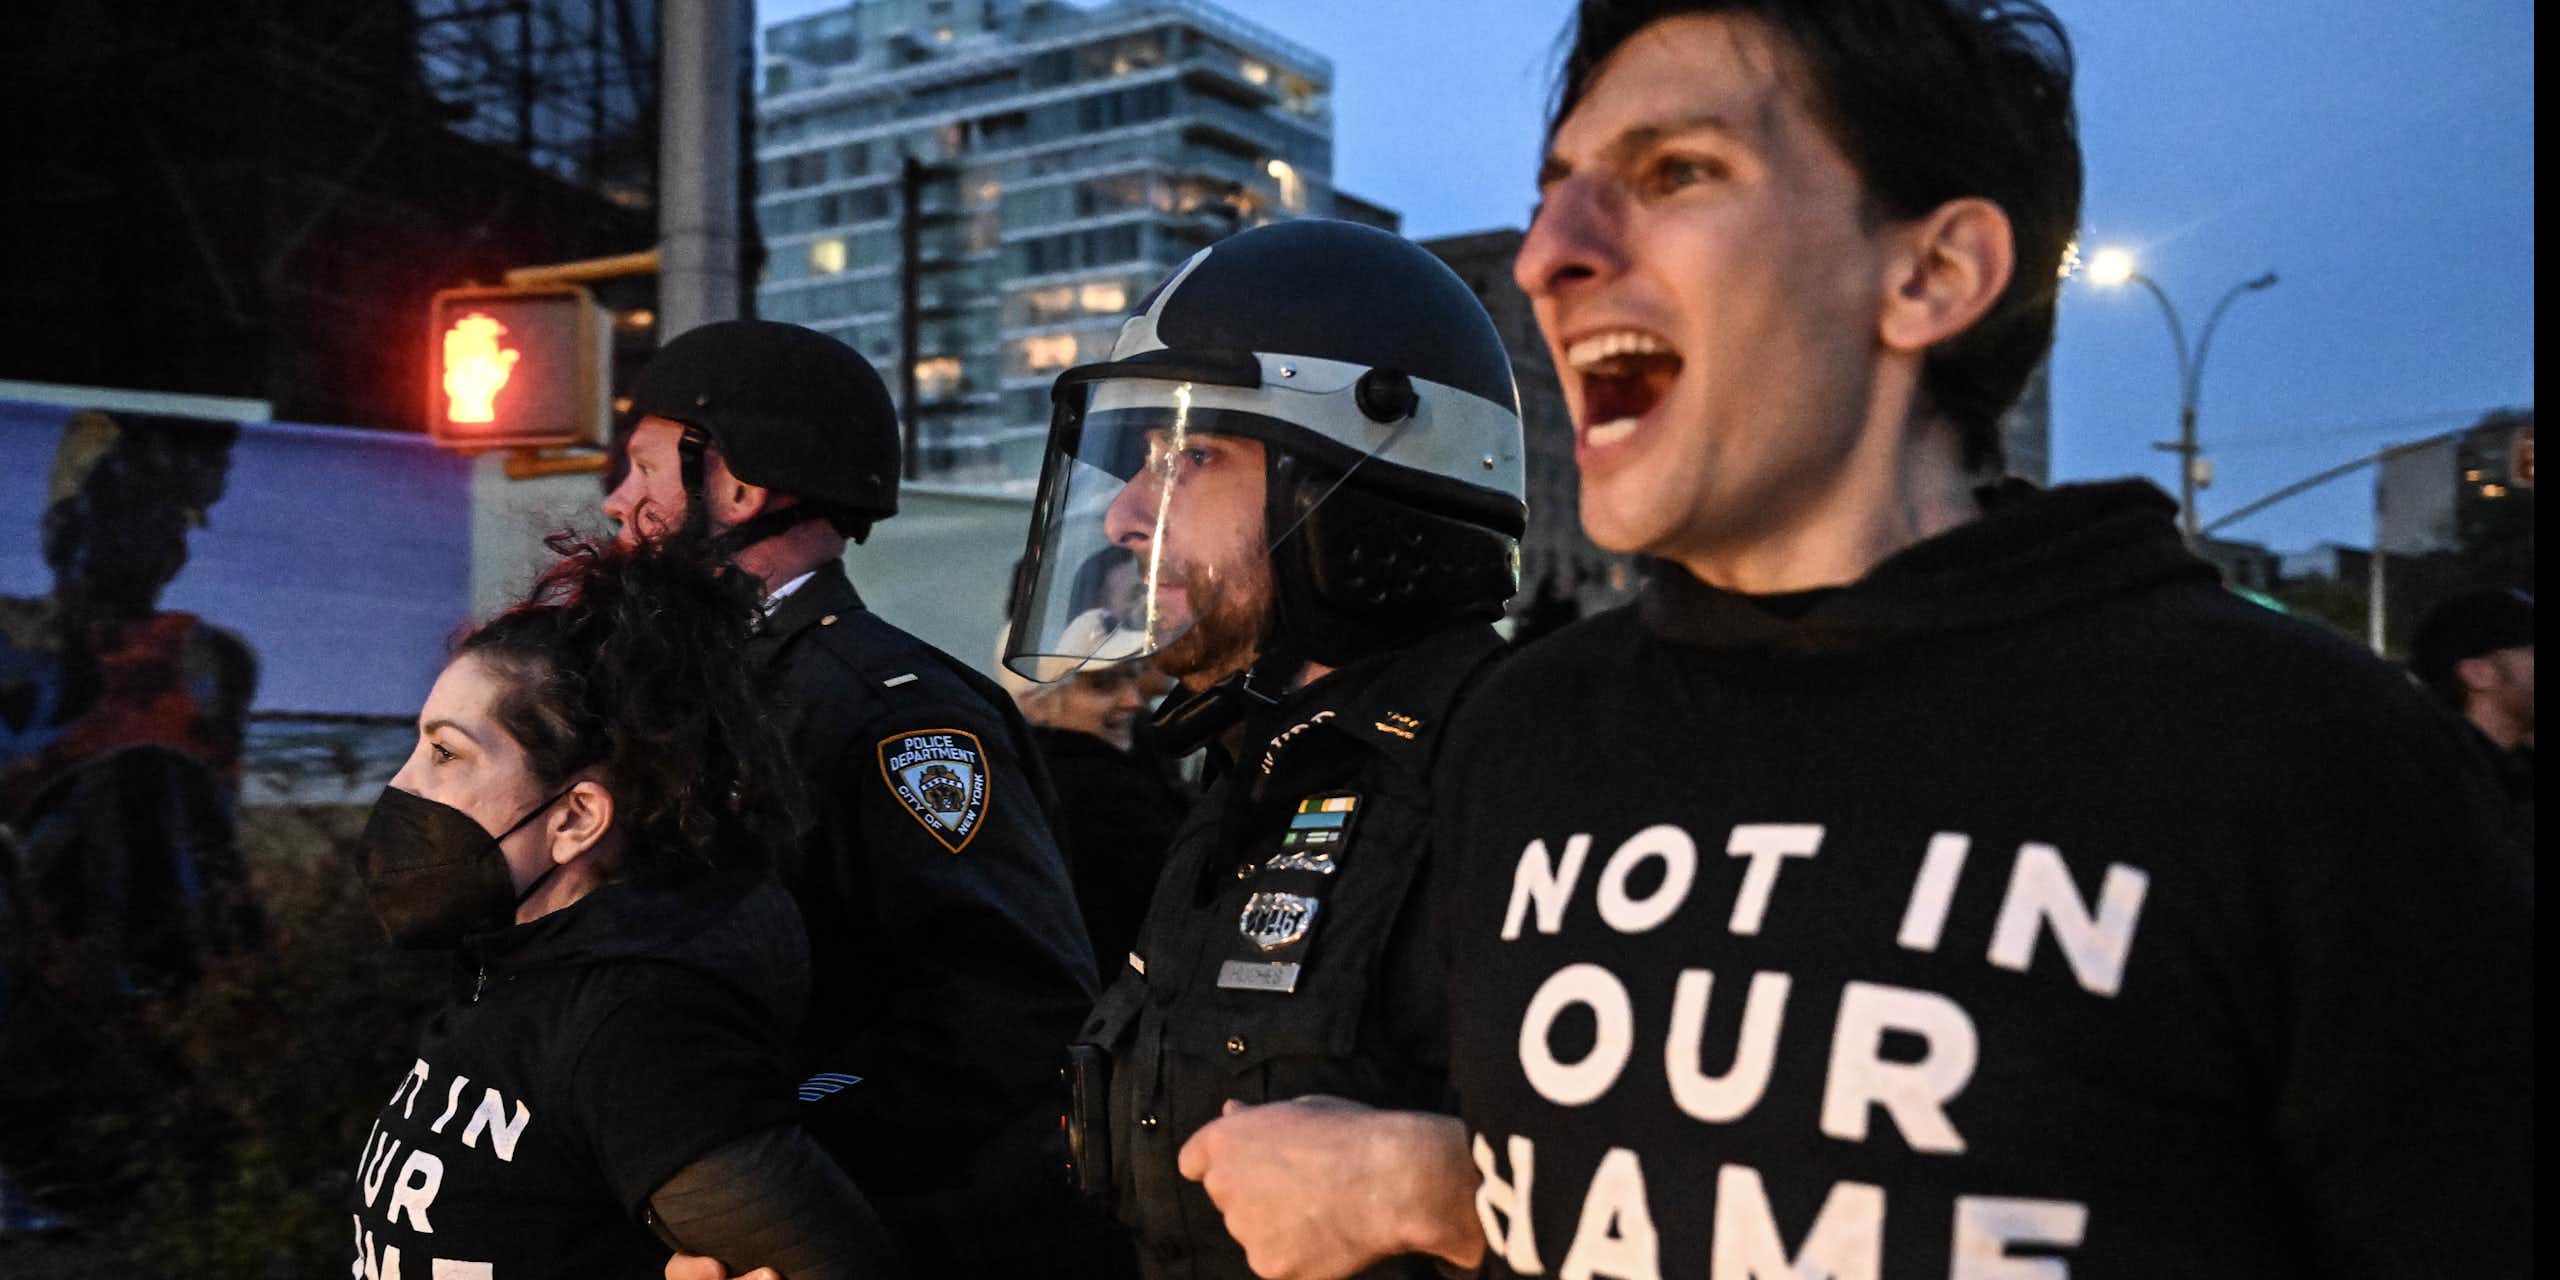 A man wearing a shirt that says 'NOT IN OUR NAME' is pulled away by police.